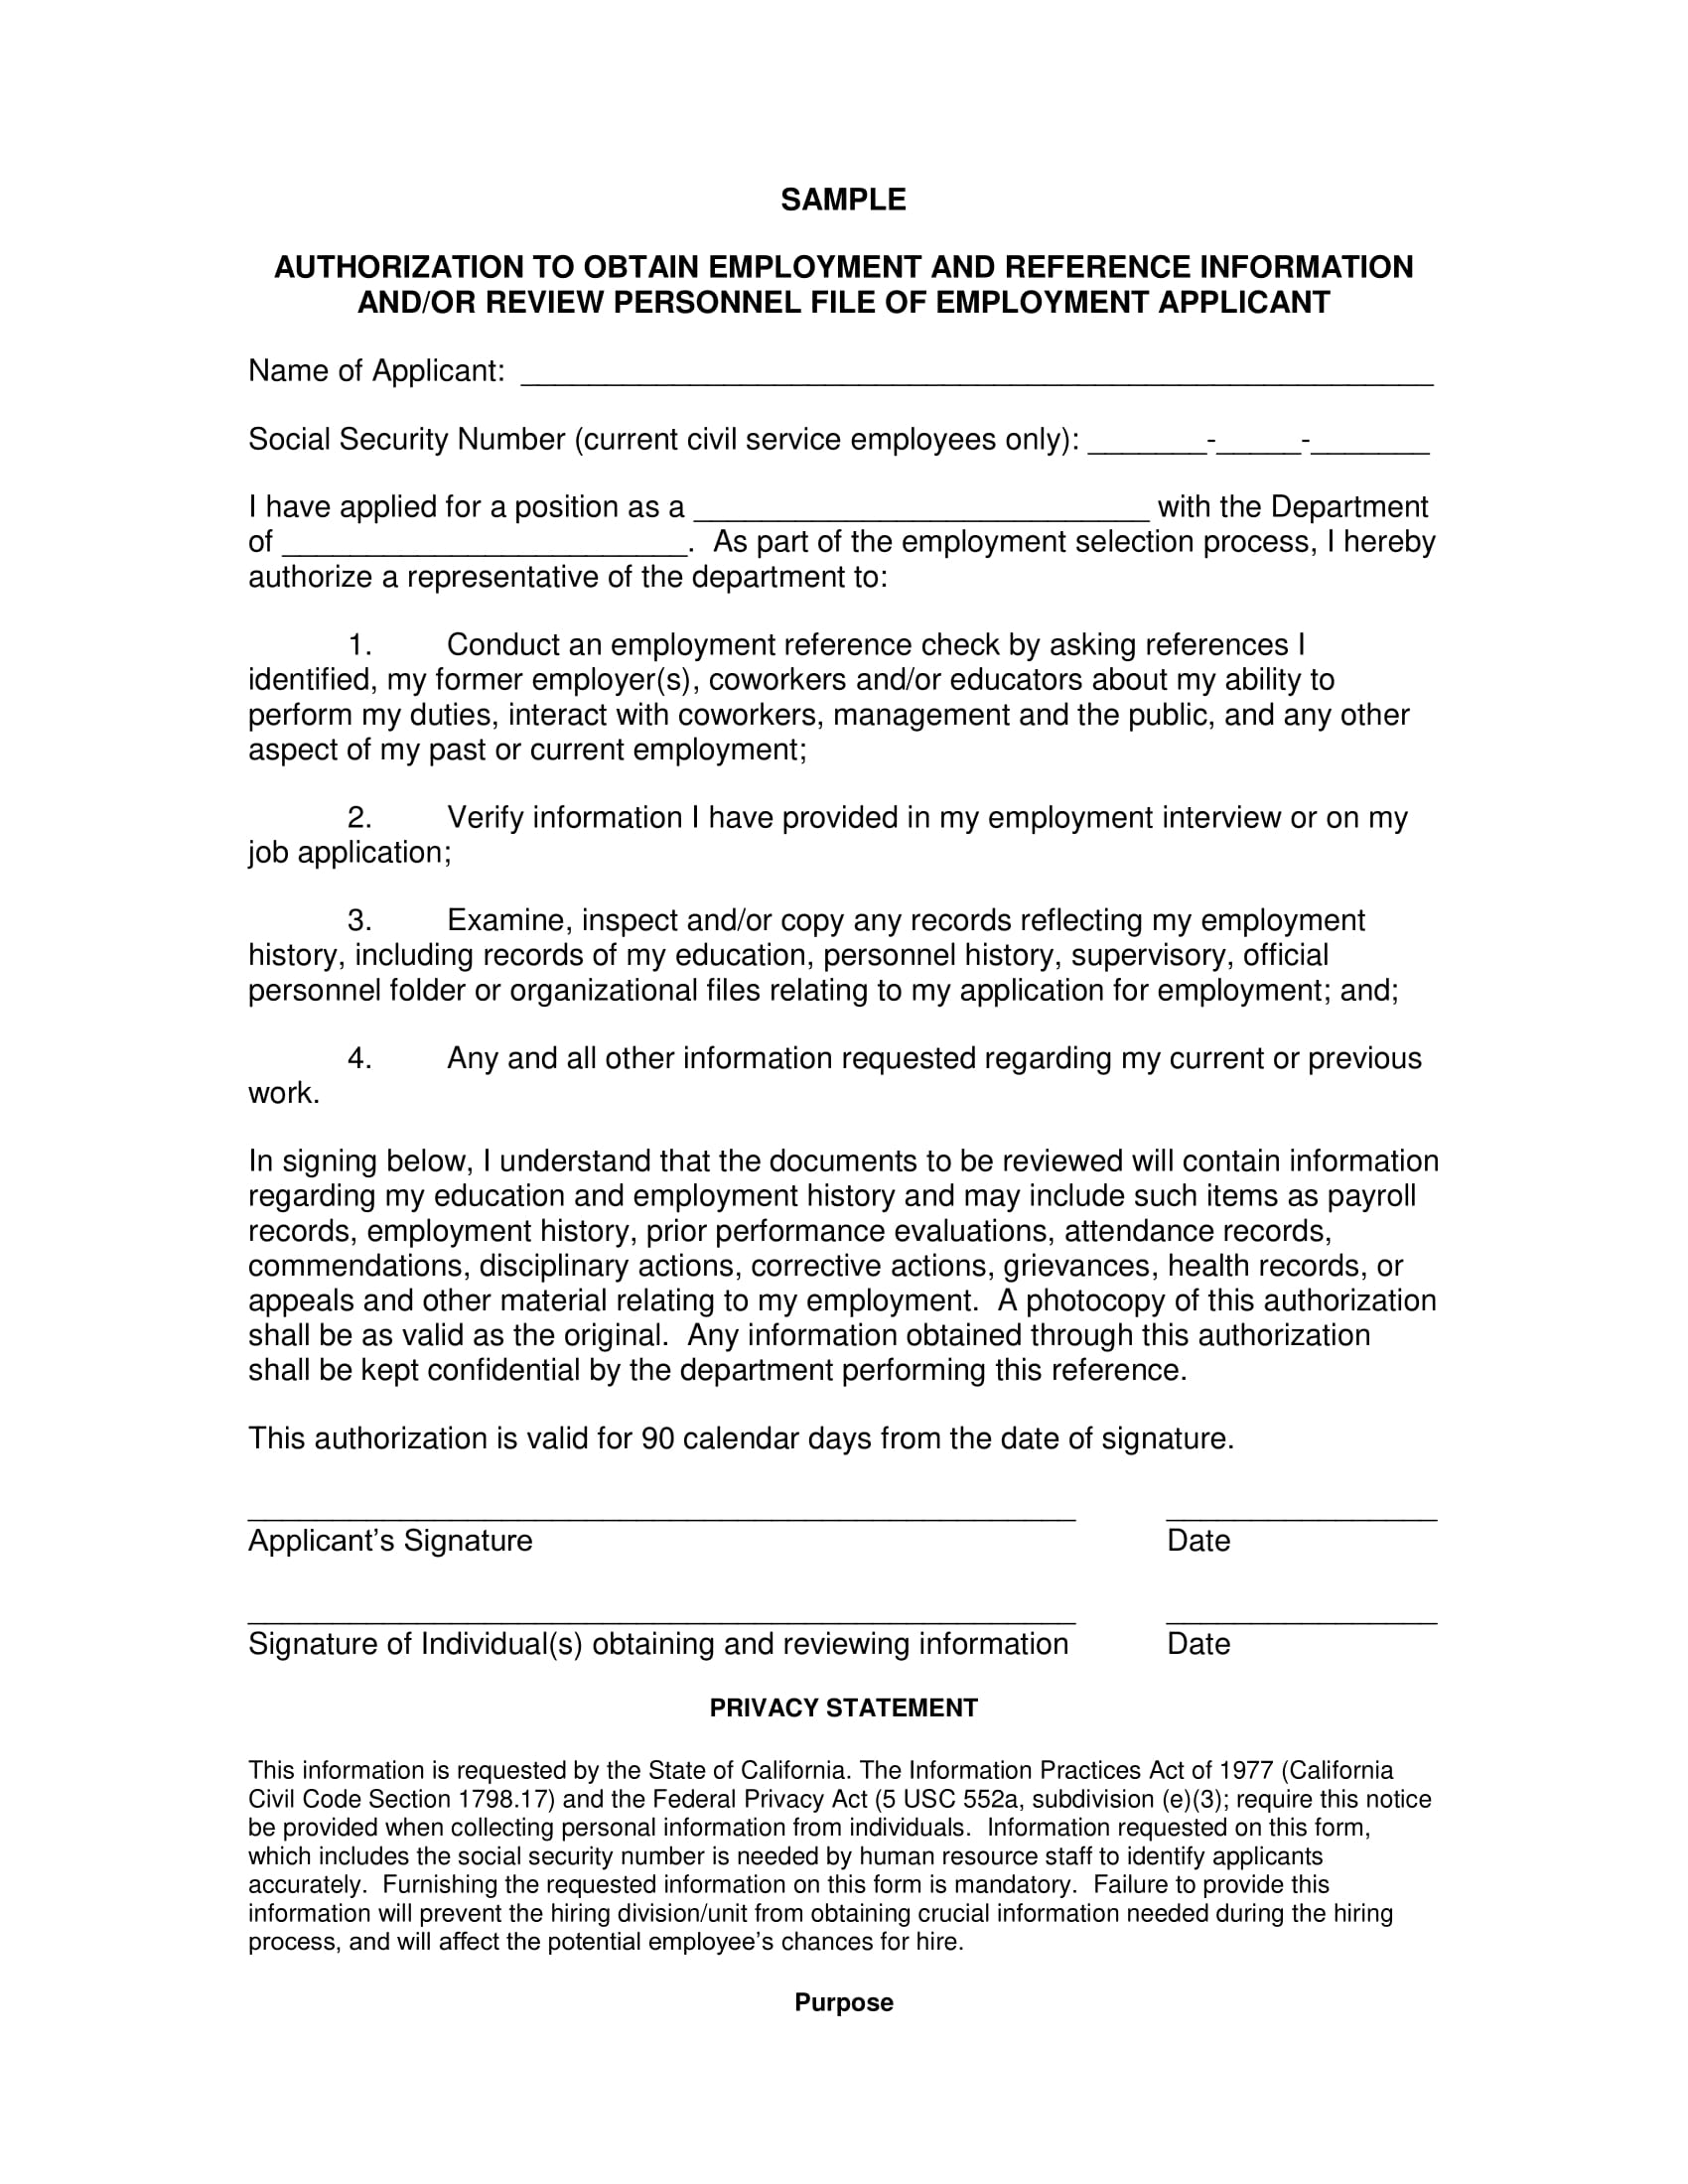 sample authorization form to obtain employment records